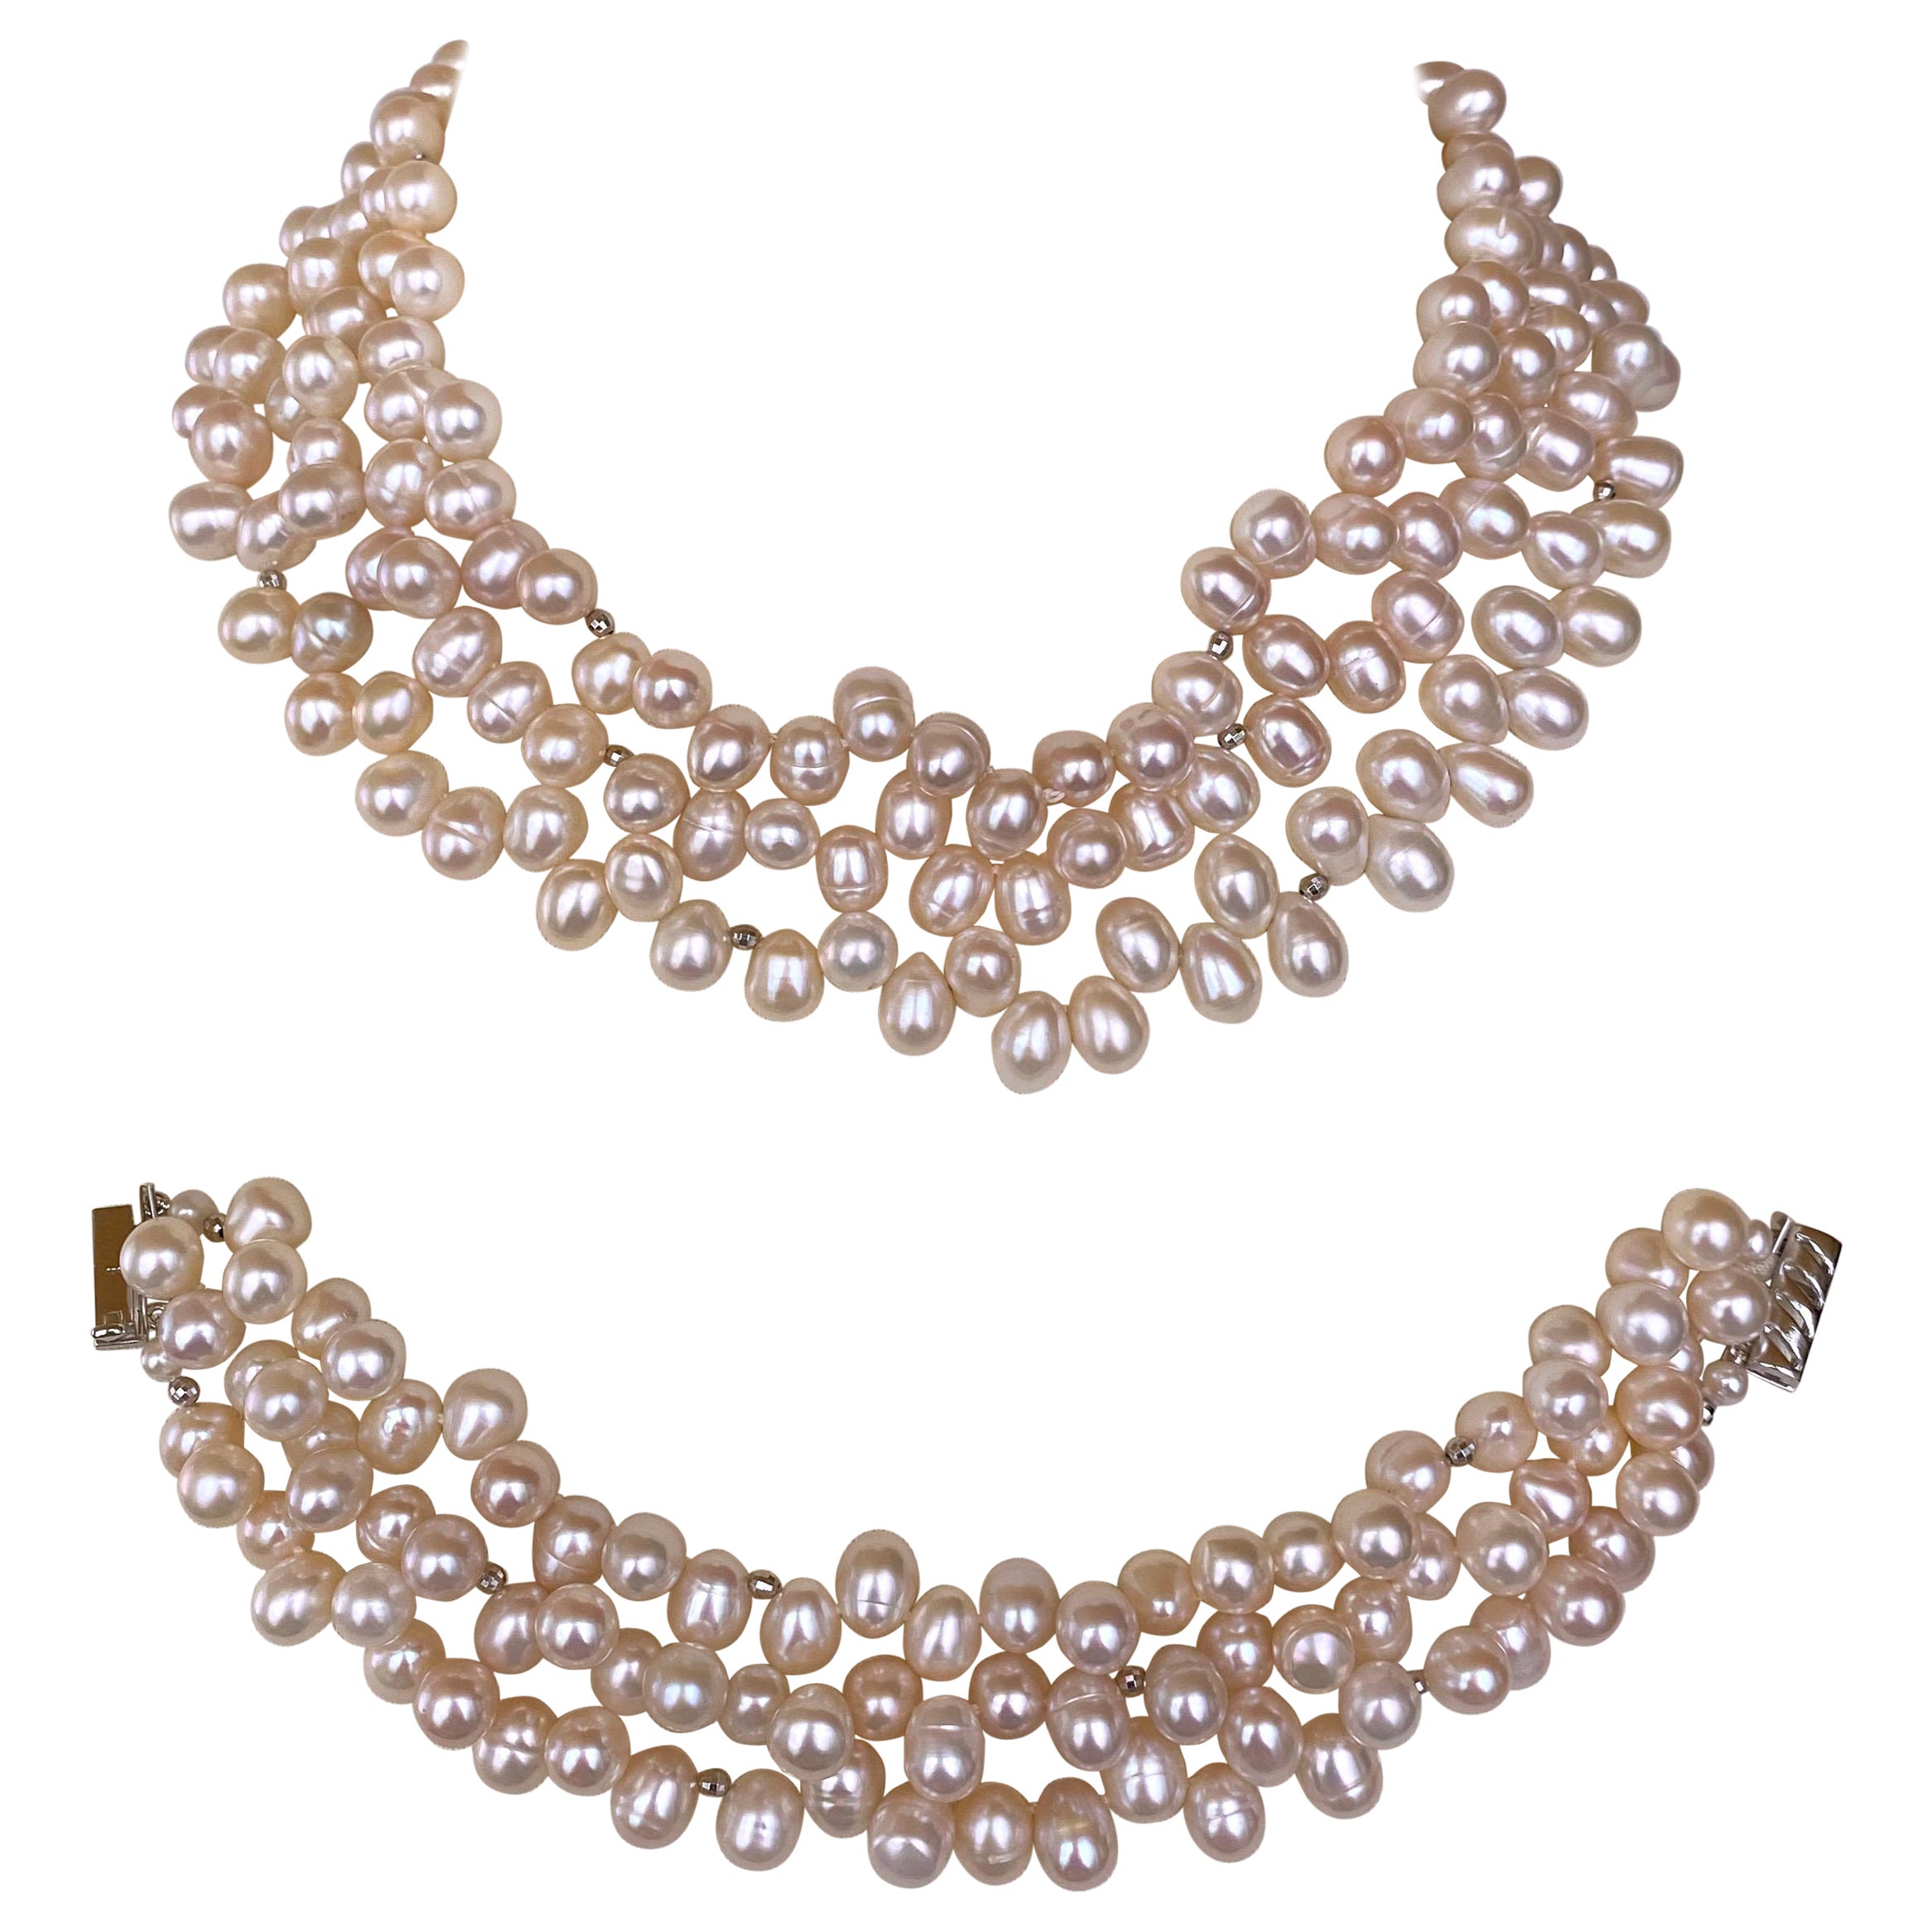 Marina J. Convertible Three in One All Pearl Necklace & Bracelet For Sale